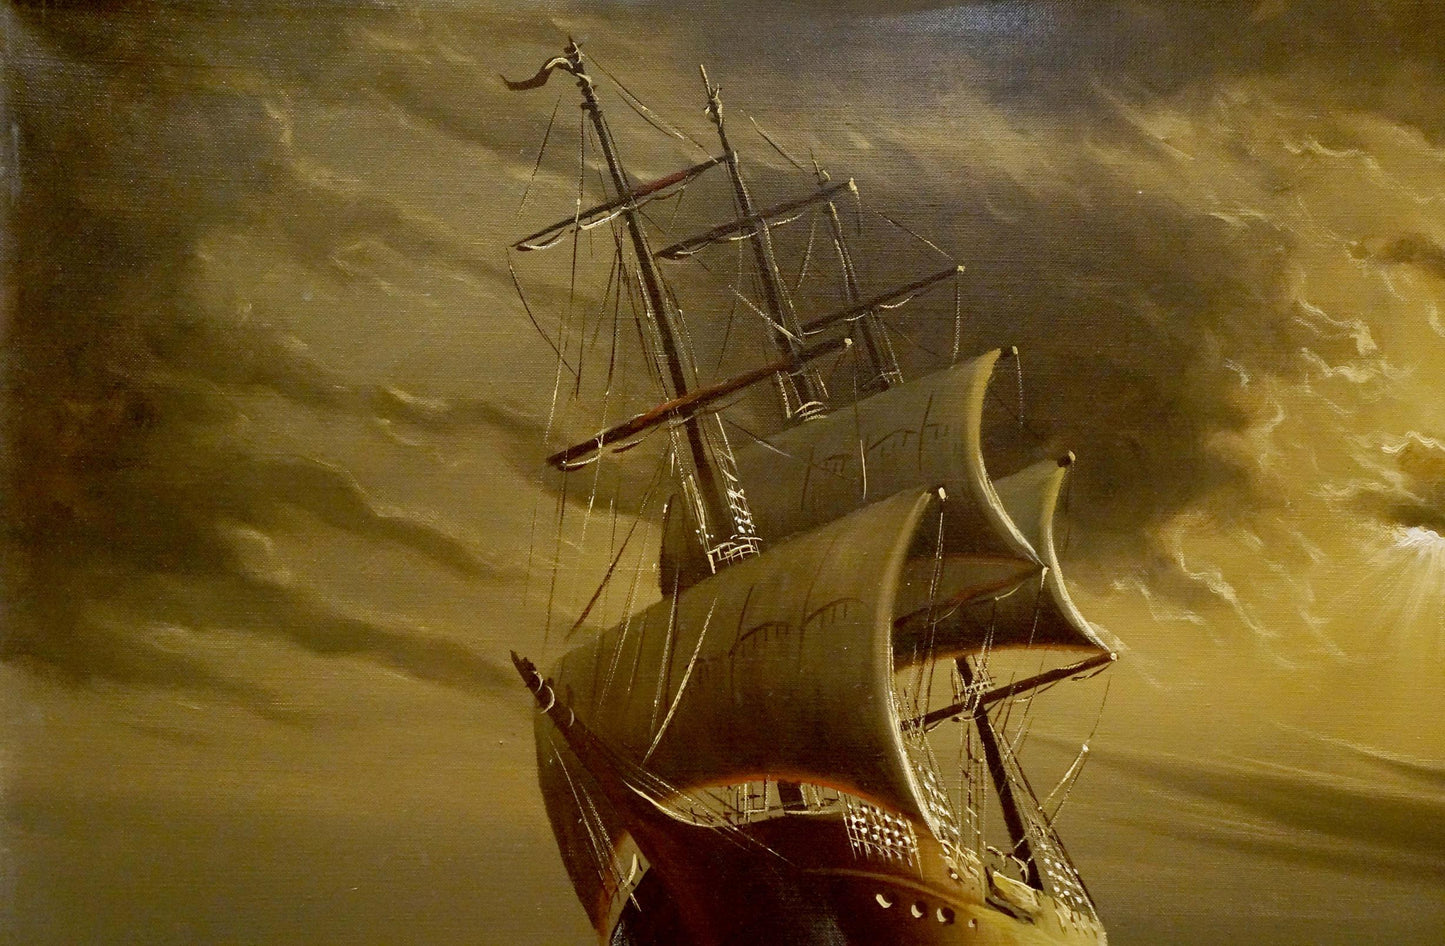 Landscape with a Ship portrayed in oil by Mody Kersler